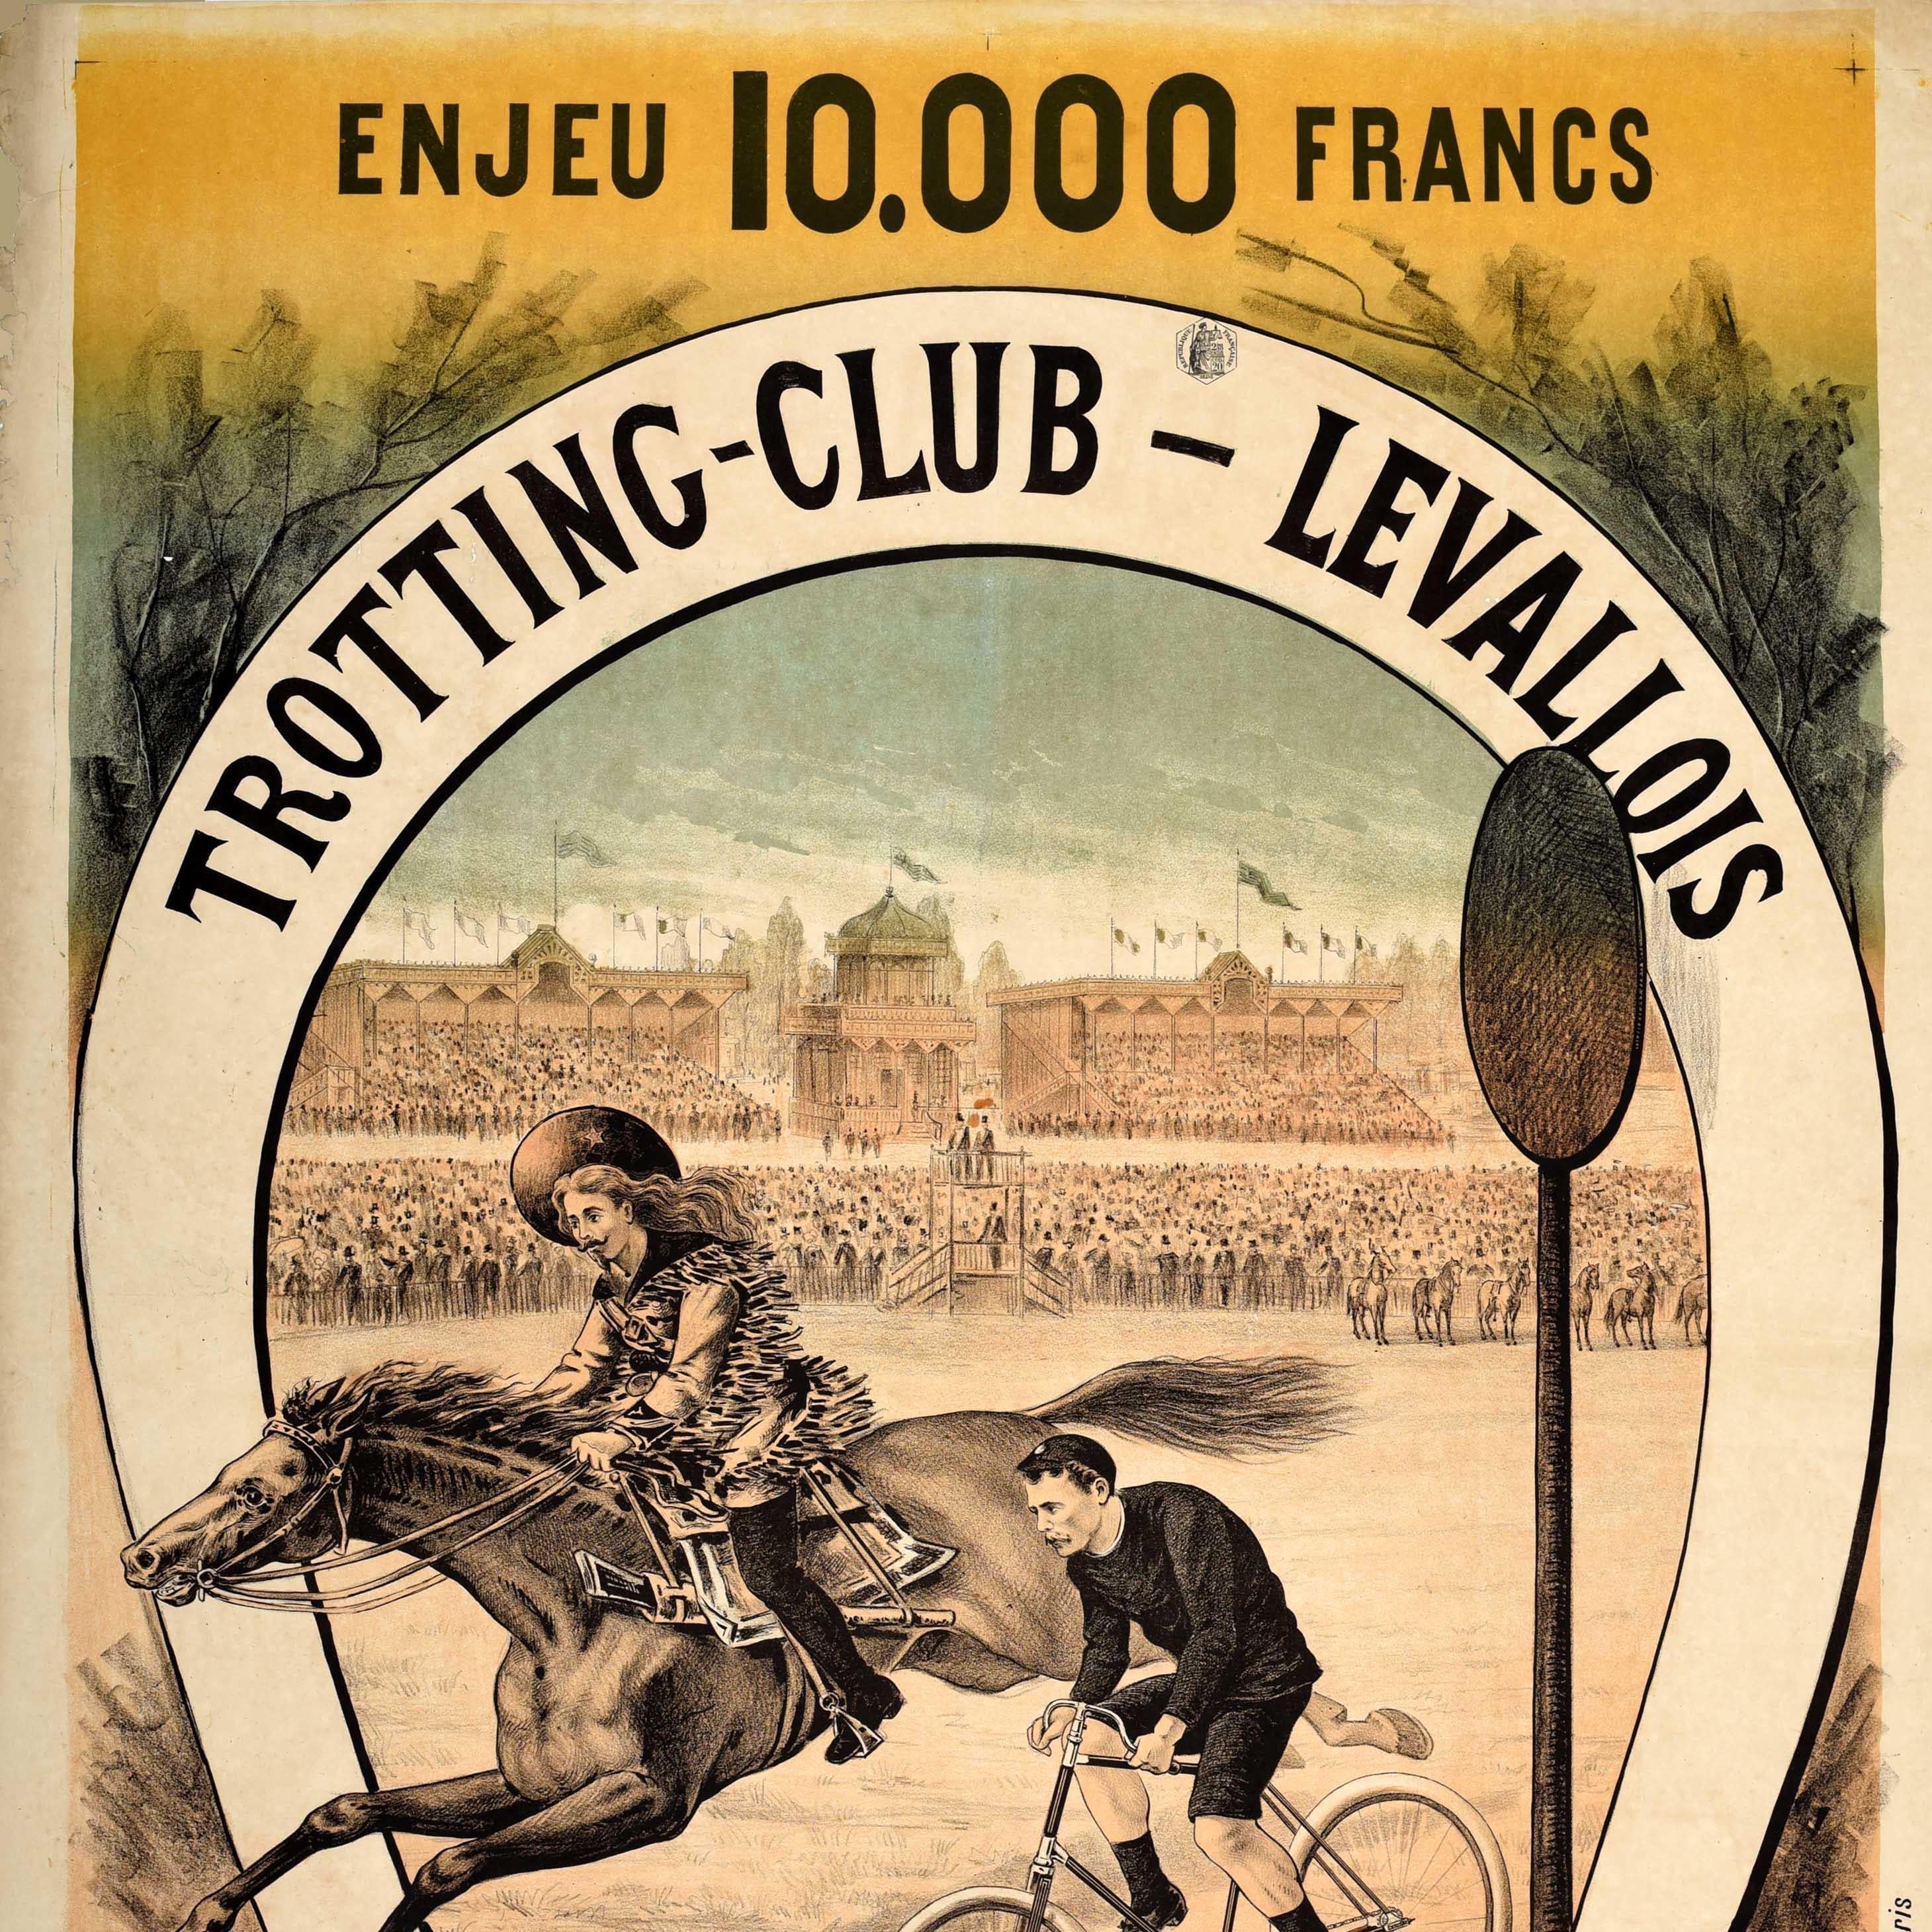 Original Antique Sport Poster Buffalo Bill Trotting Club Levallois Horse Racing - Beige Print by Unknown